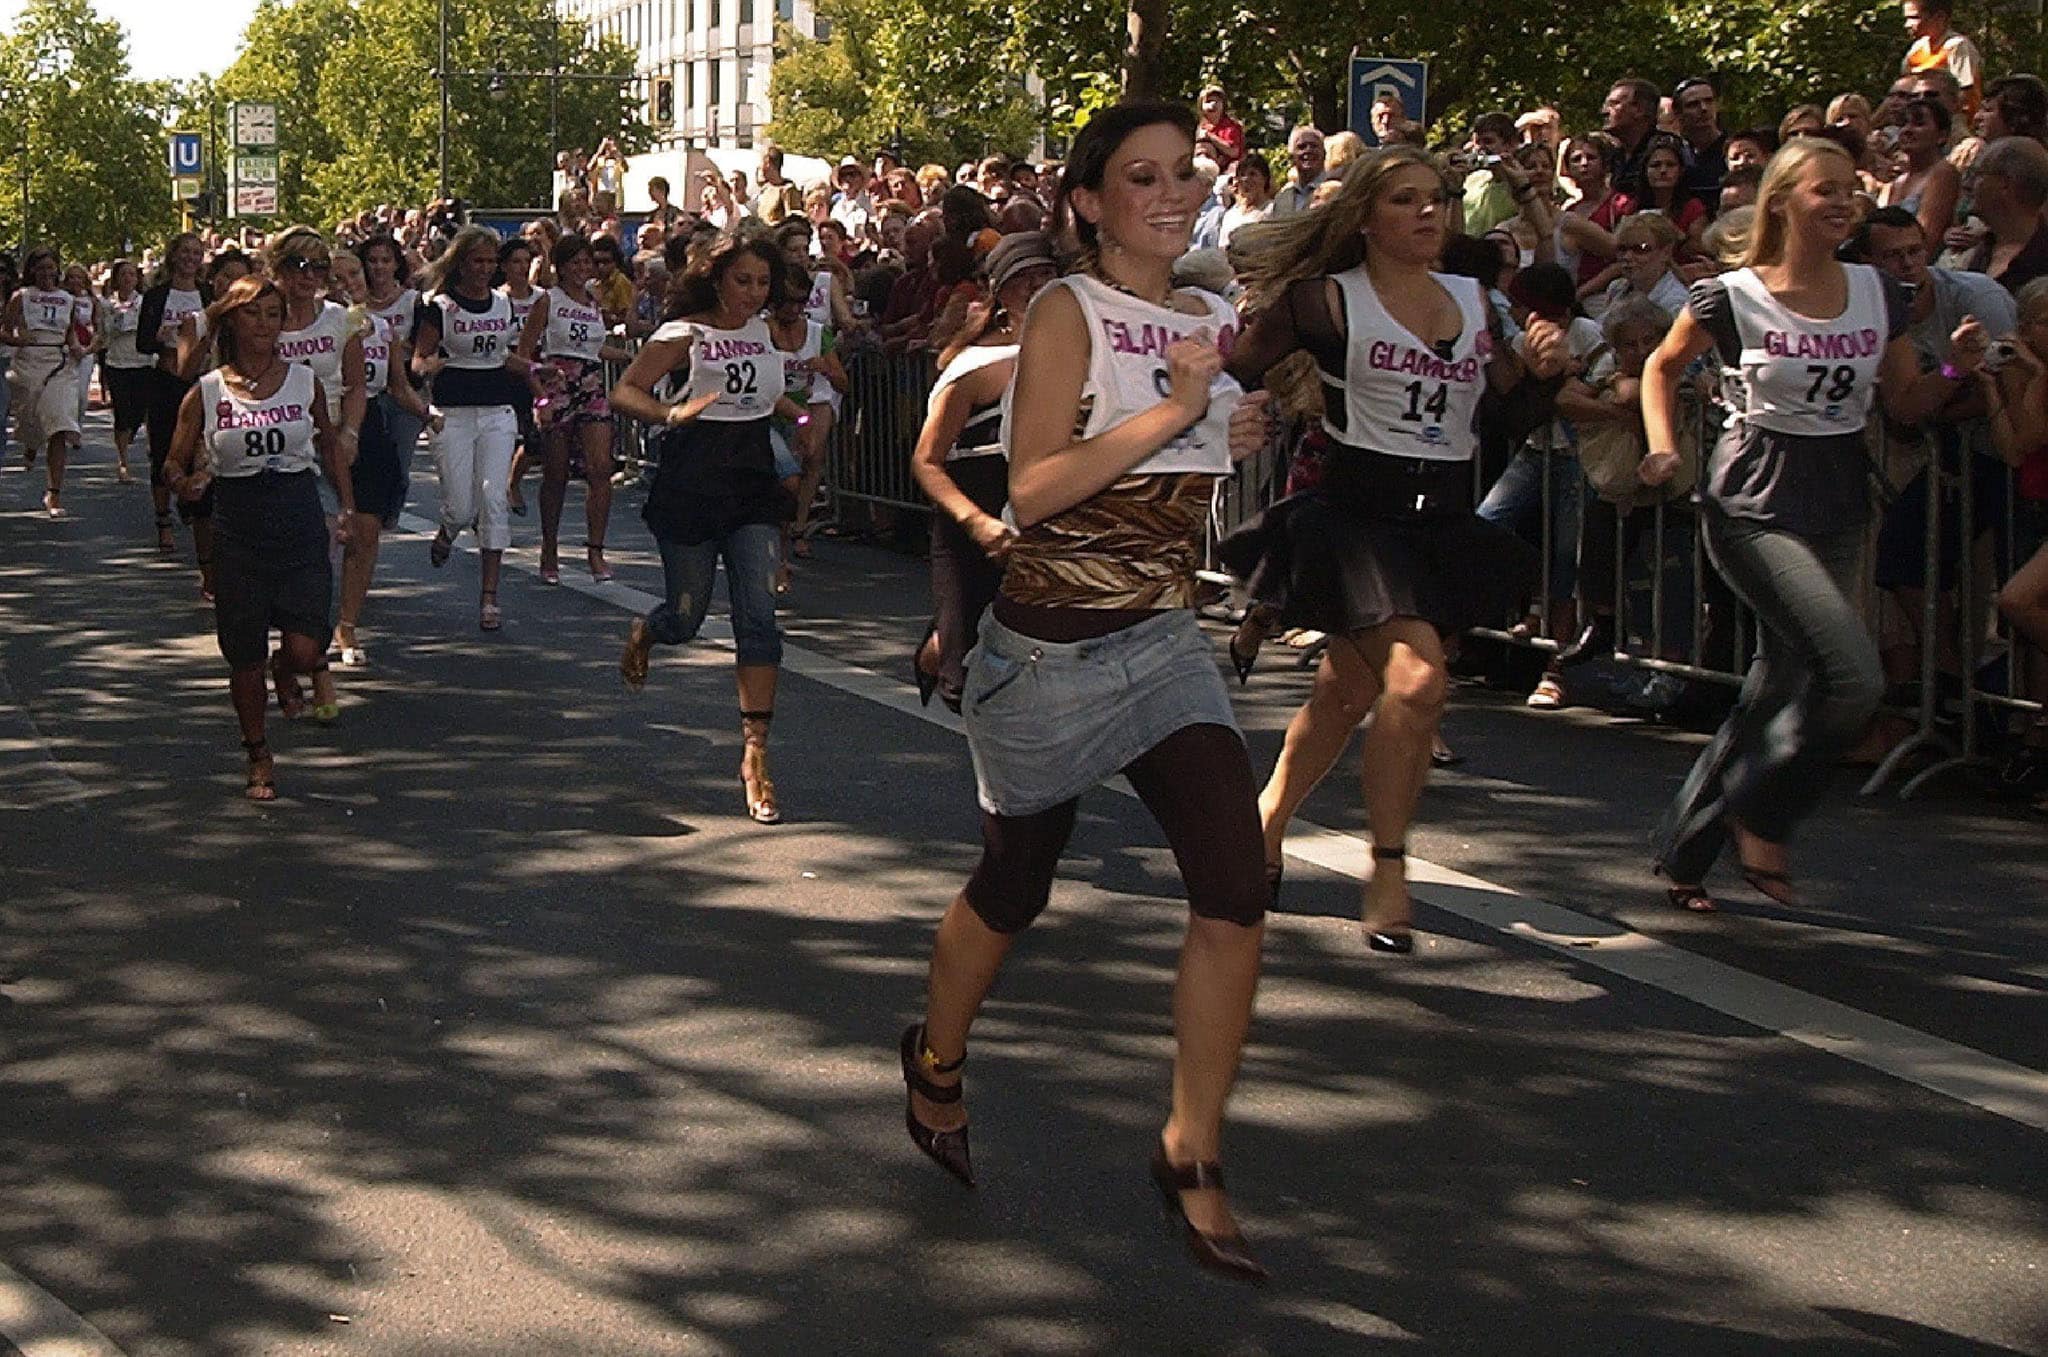 German edition of Glamour magazine invited 100 women to run in high heels in Berlin in 2006